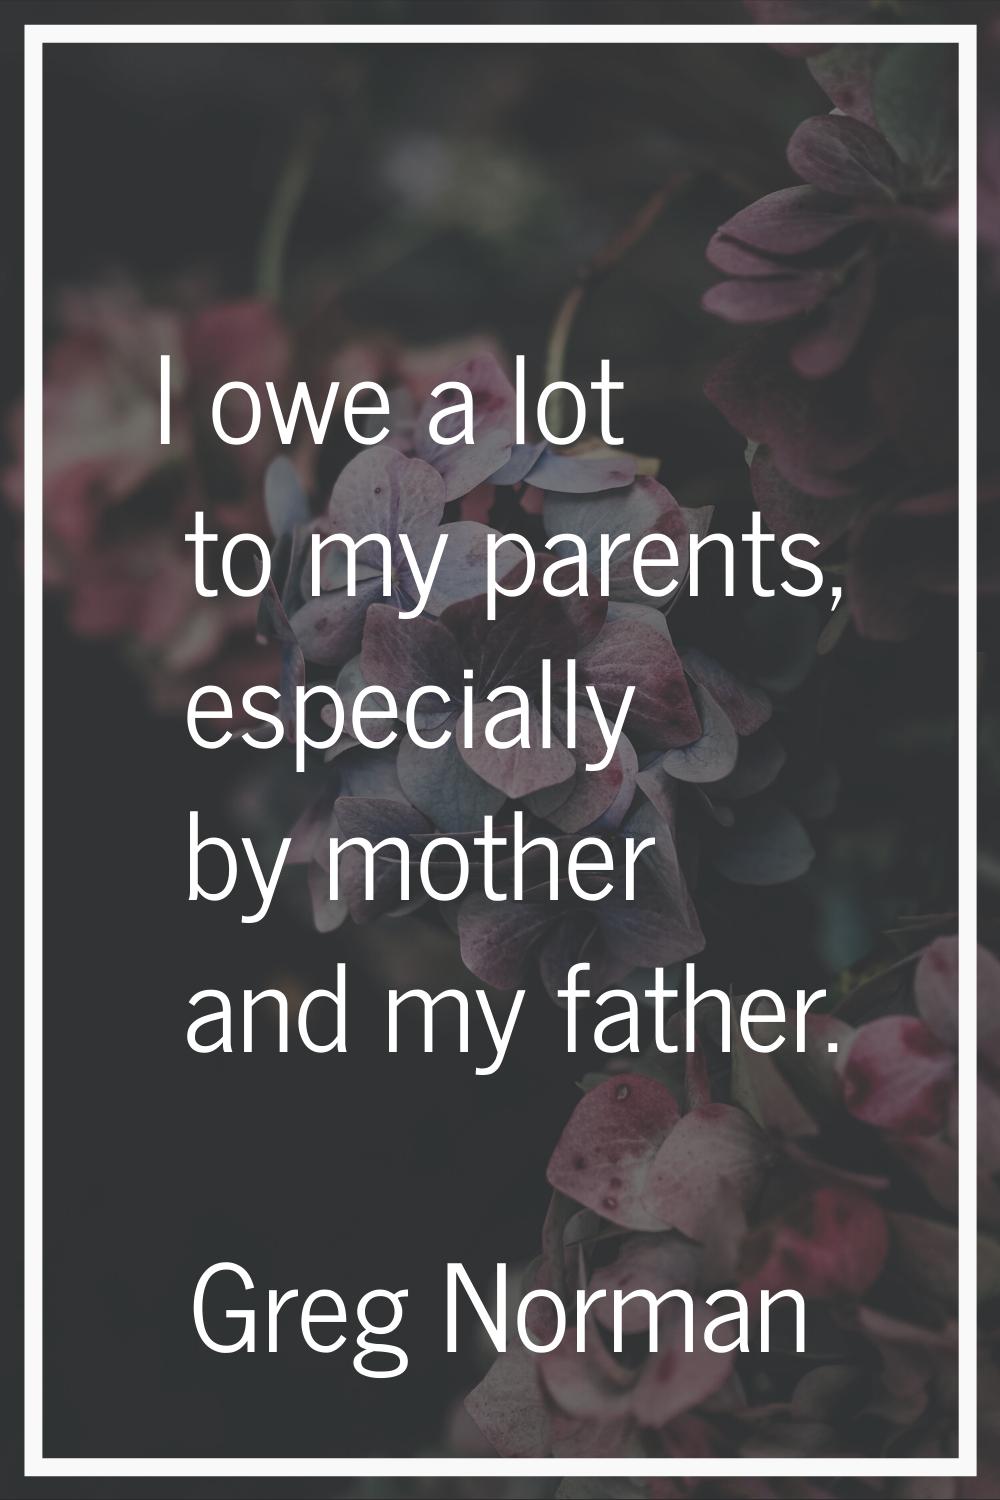 I owe a lot to my parents, especially by mother and my father.